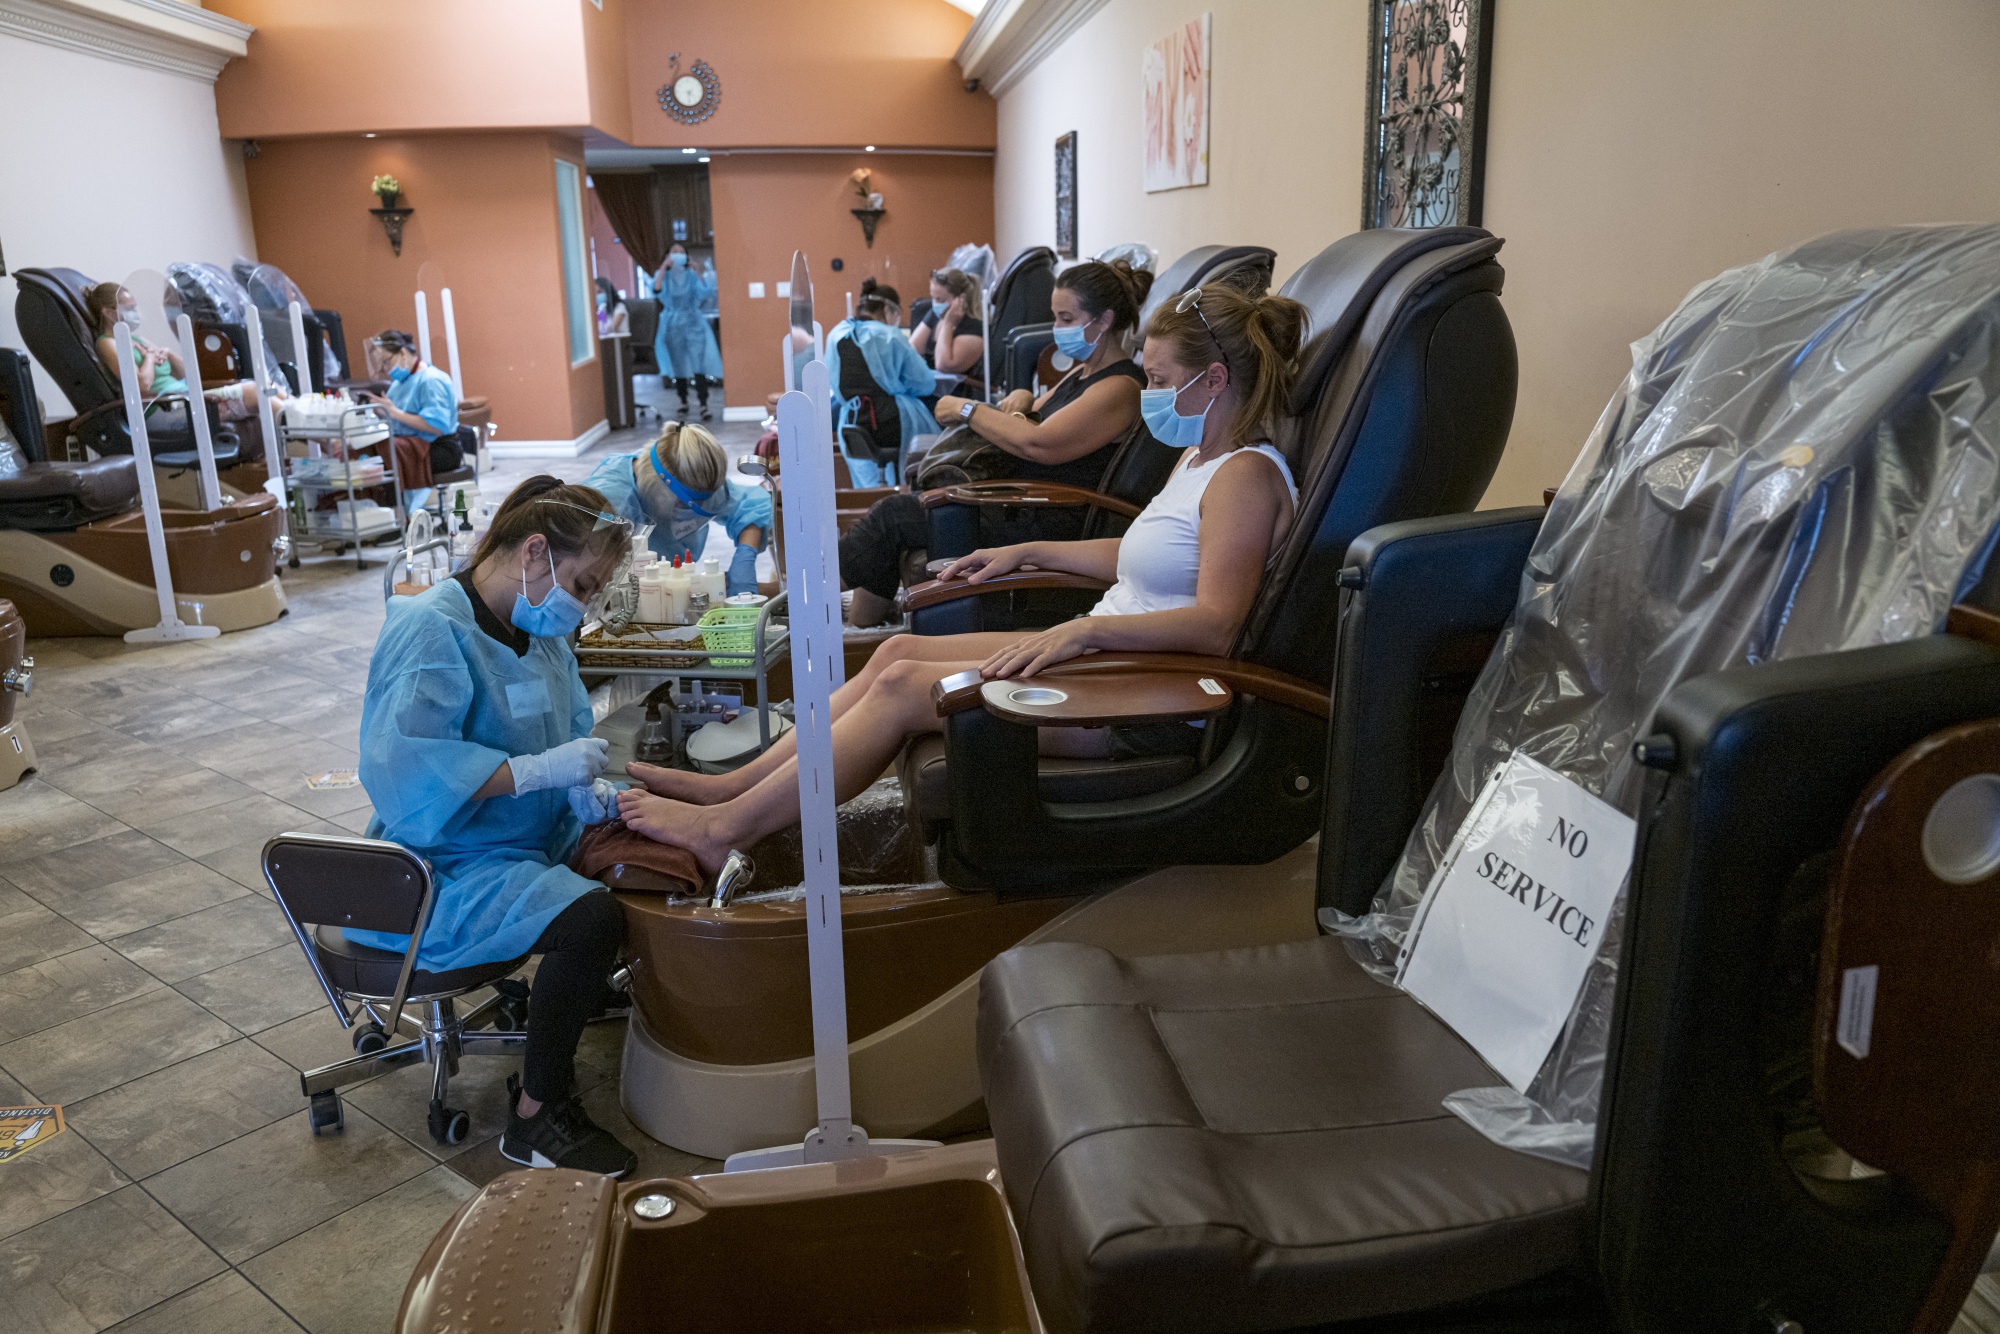 Workers wearing personal protective equipment (PPE) help customers wearing protective masks at a nail salon in Palo Alto, California, on&nbsp;July 14.